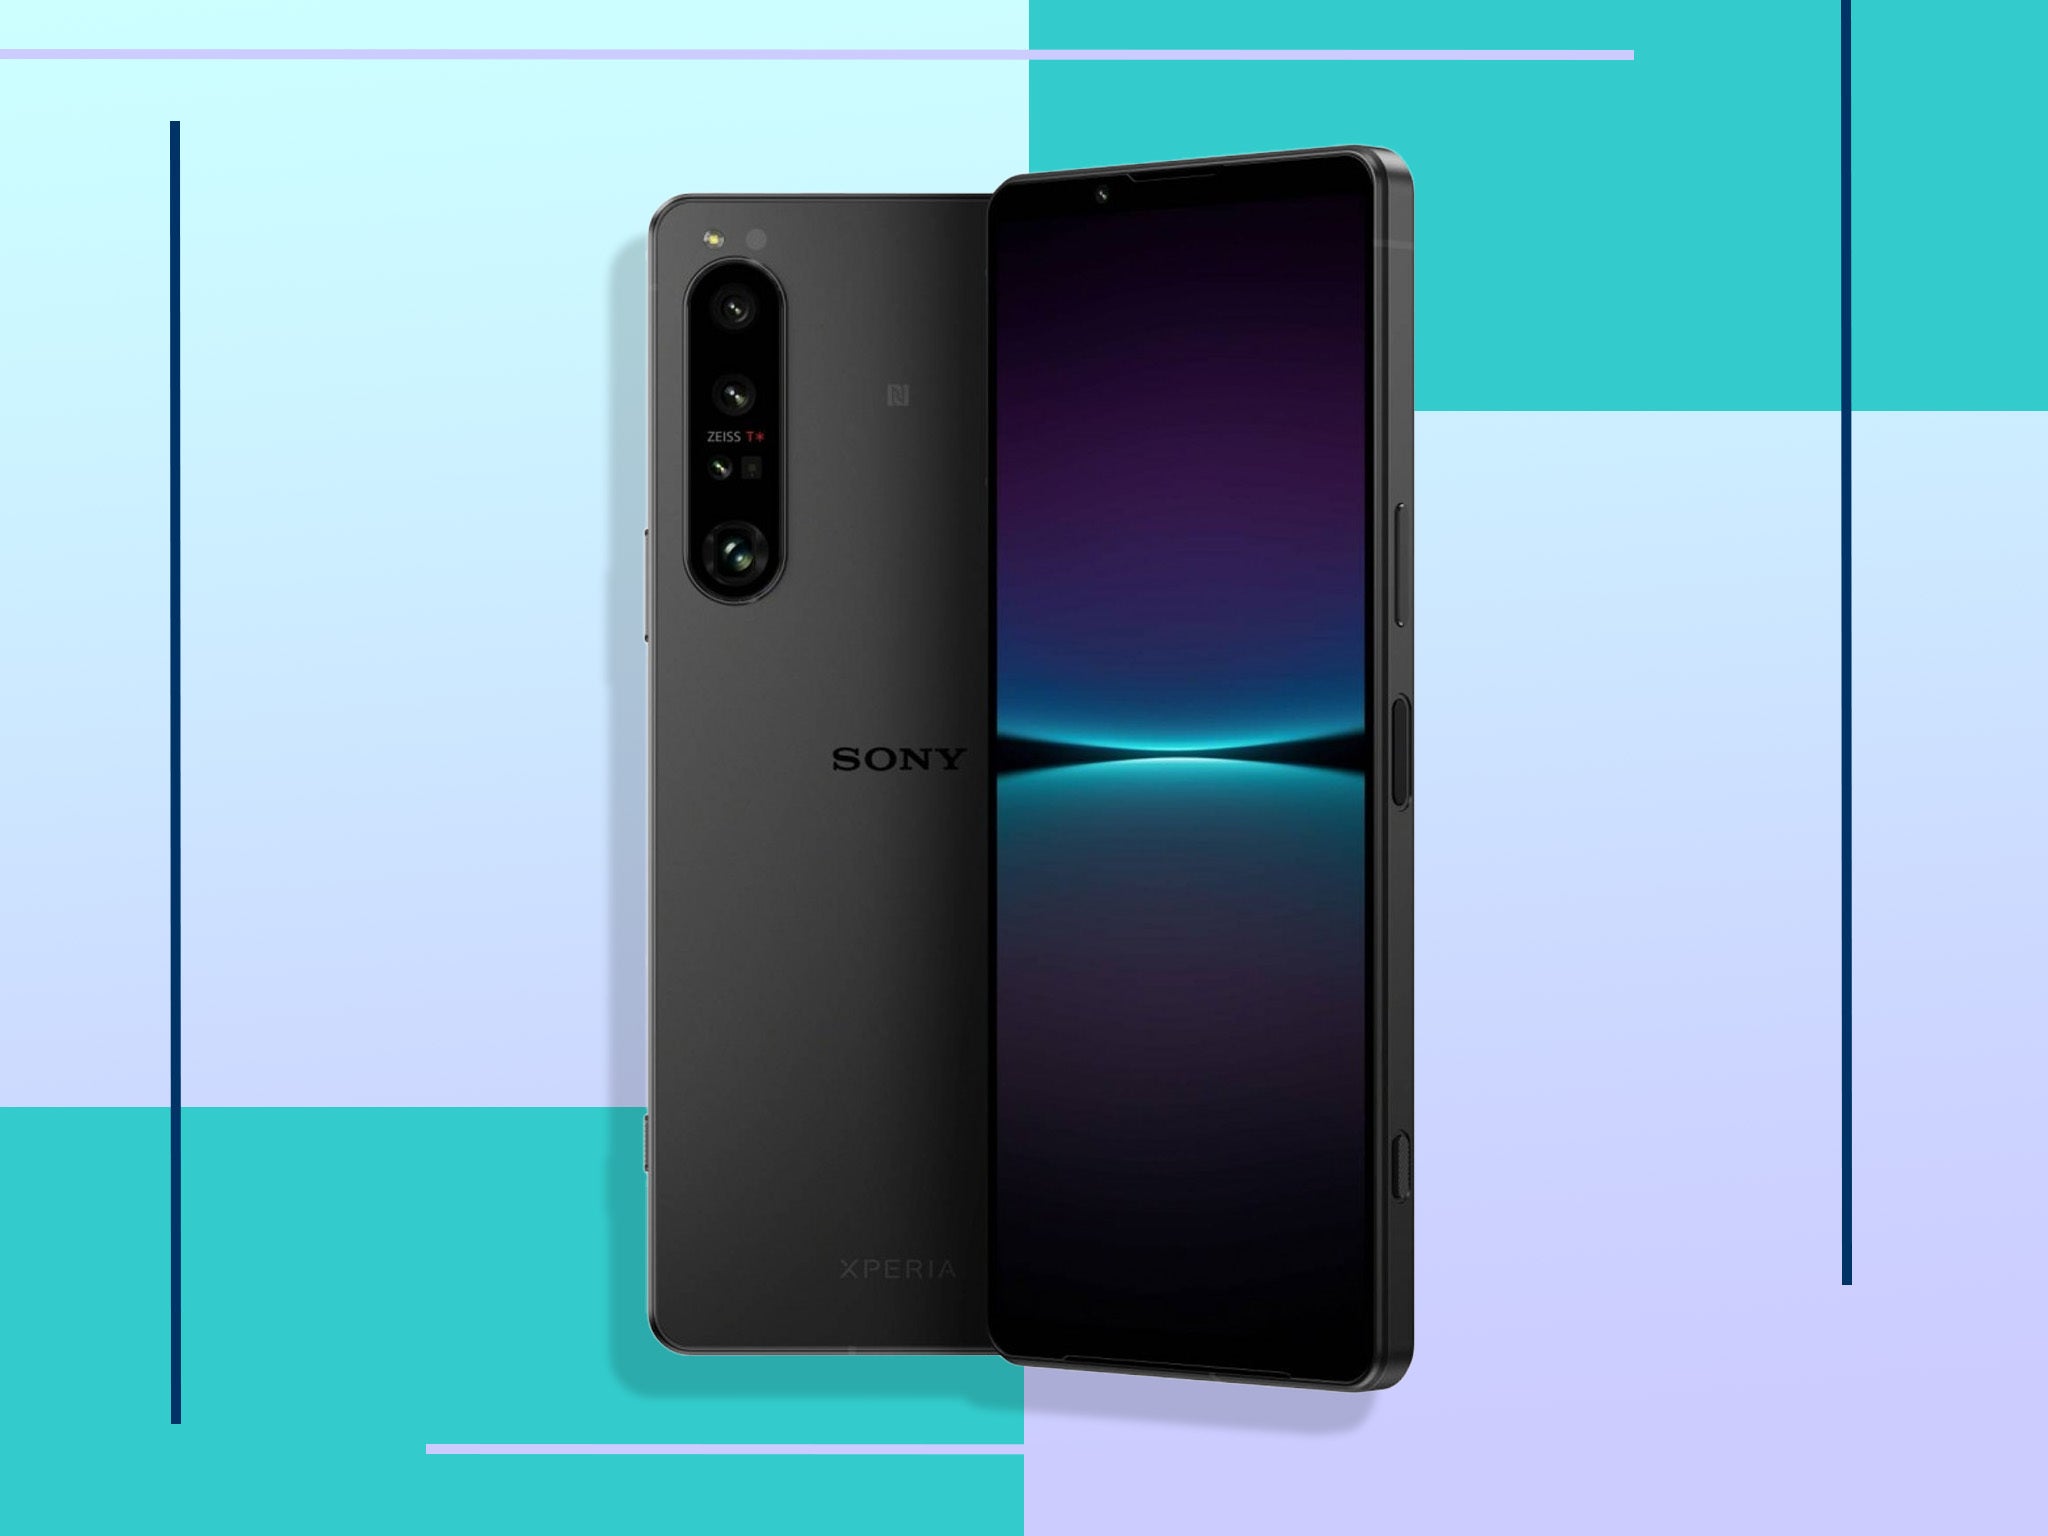 The Sony Xperia 1 IV comes in black, purple or white